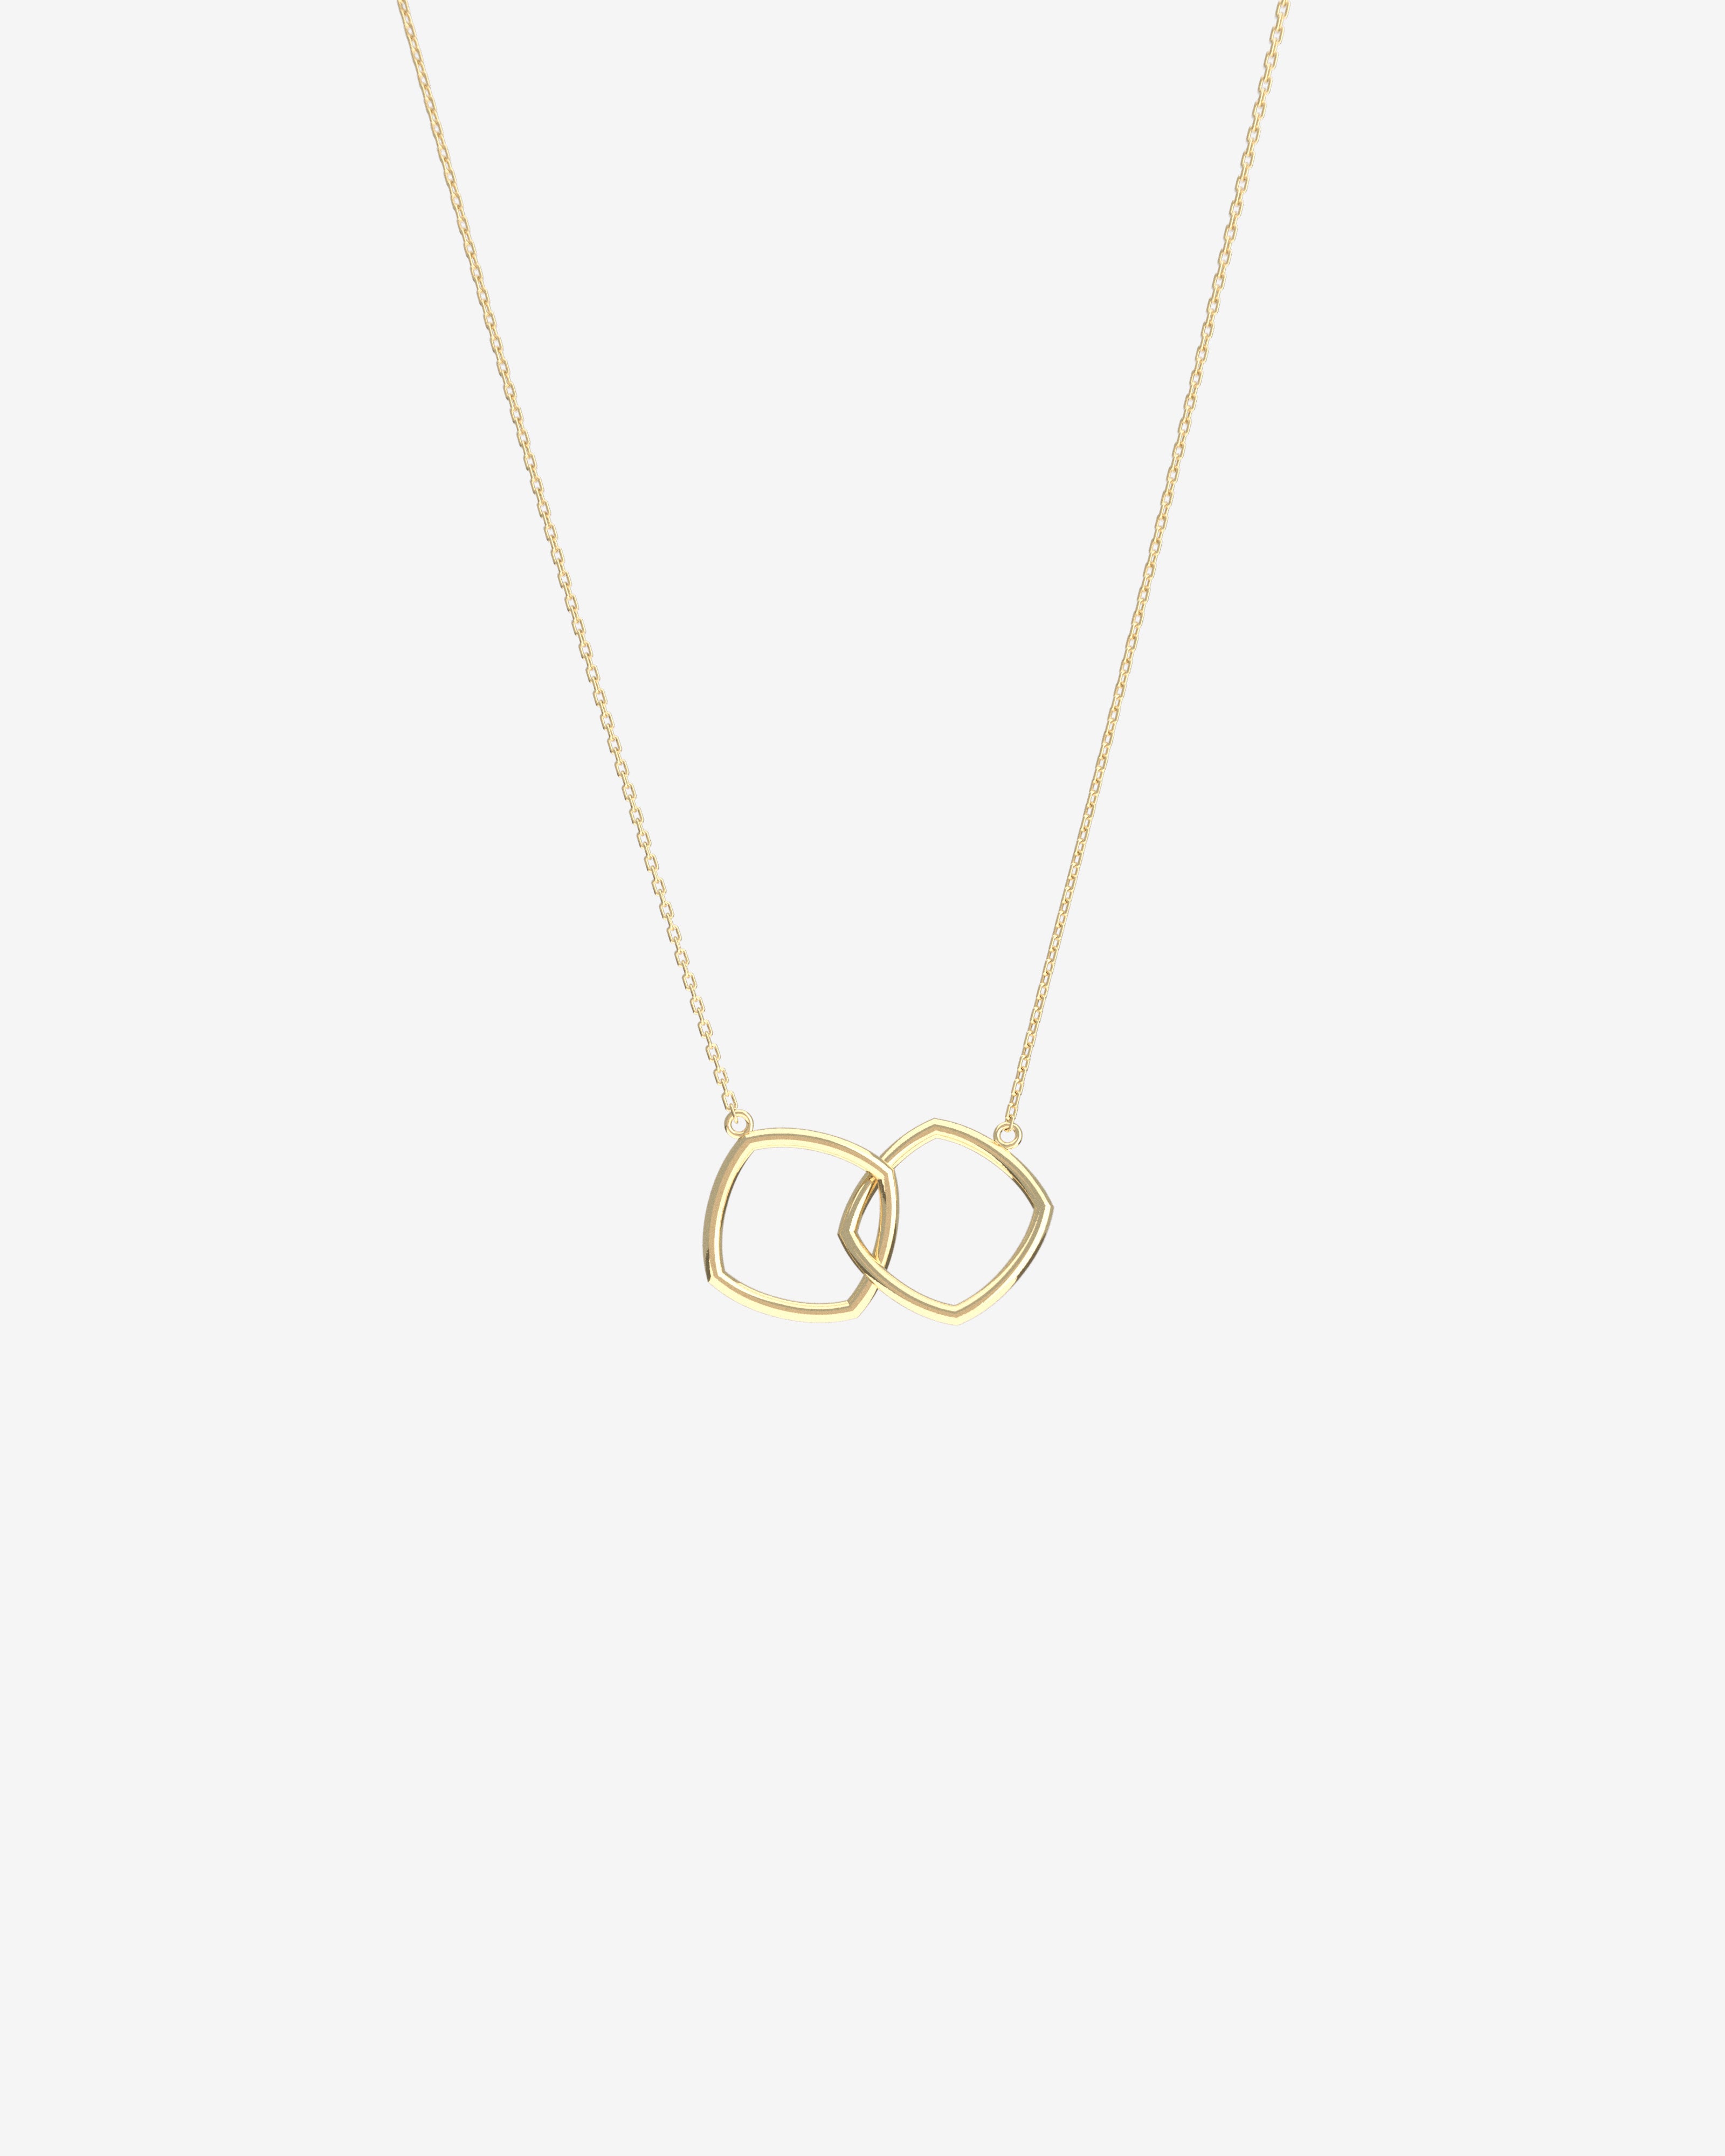 SOLID-YELLOW-GOLD-ACCENT-NECKLACE-SENER-BESIM